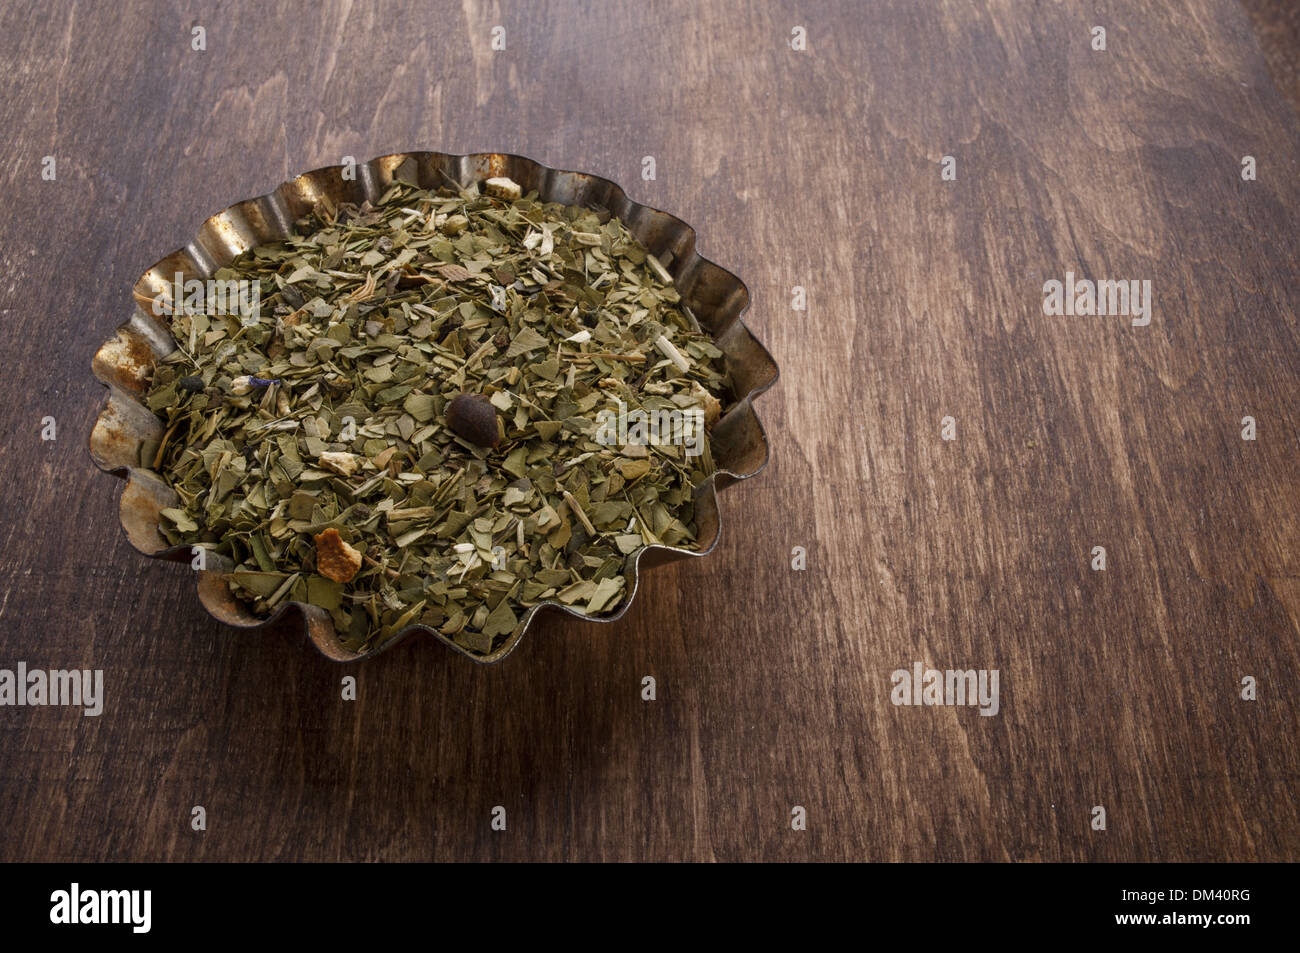 Dry mate tea on wooden background 2 Stock Photo